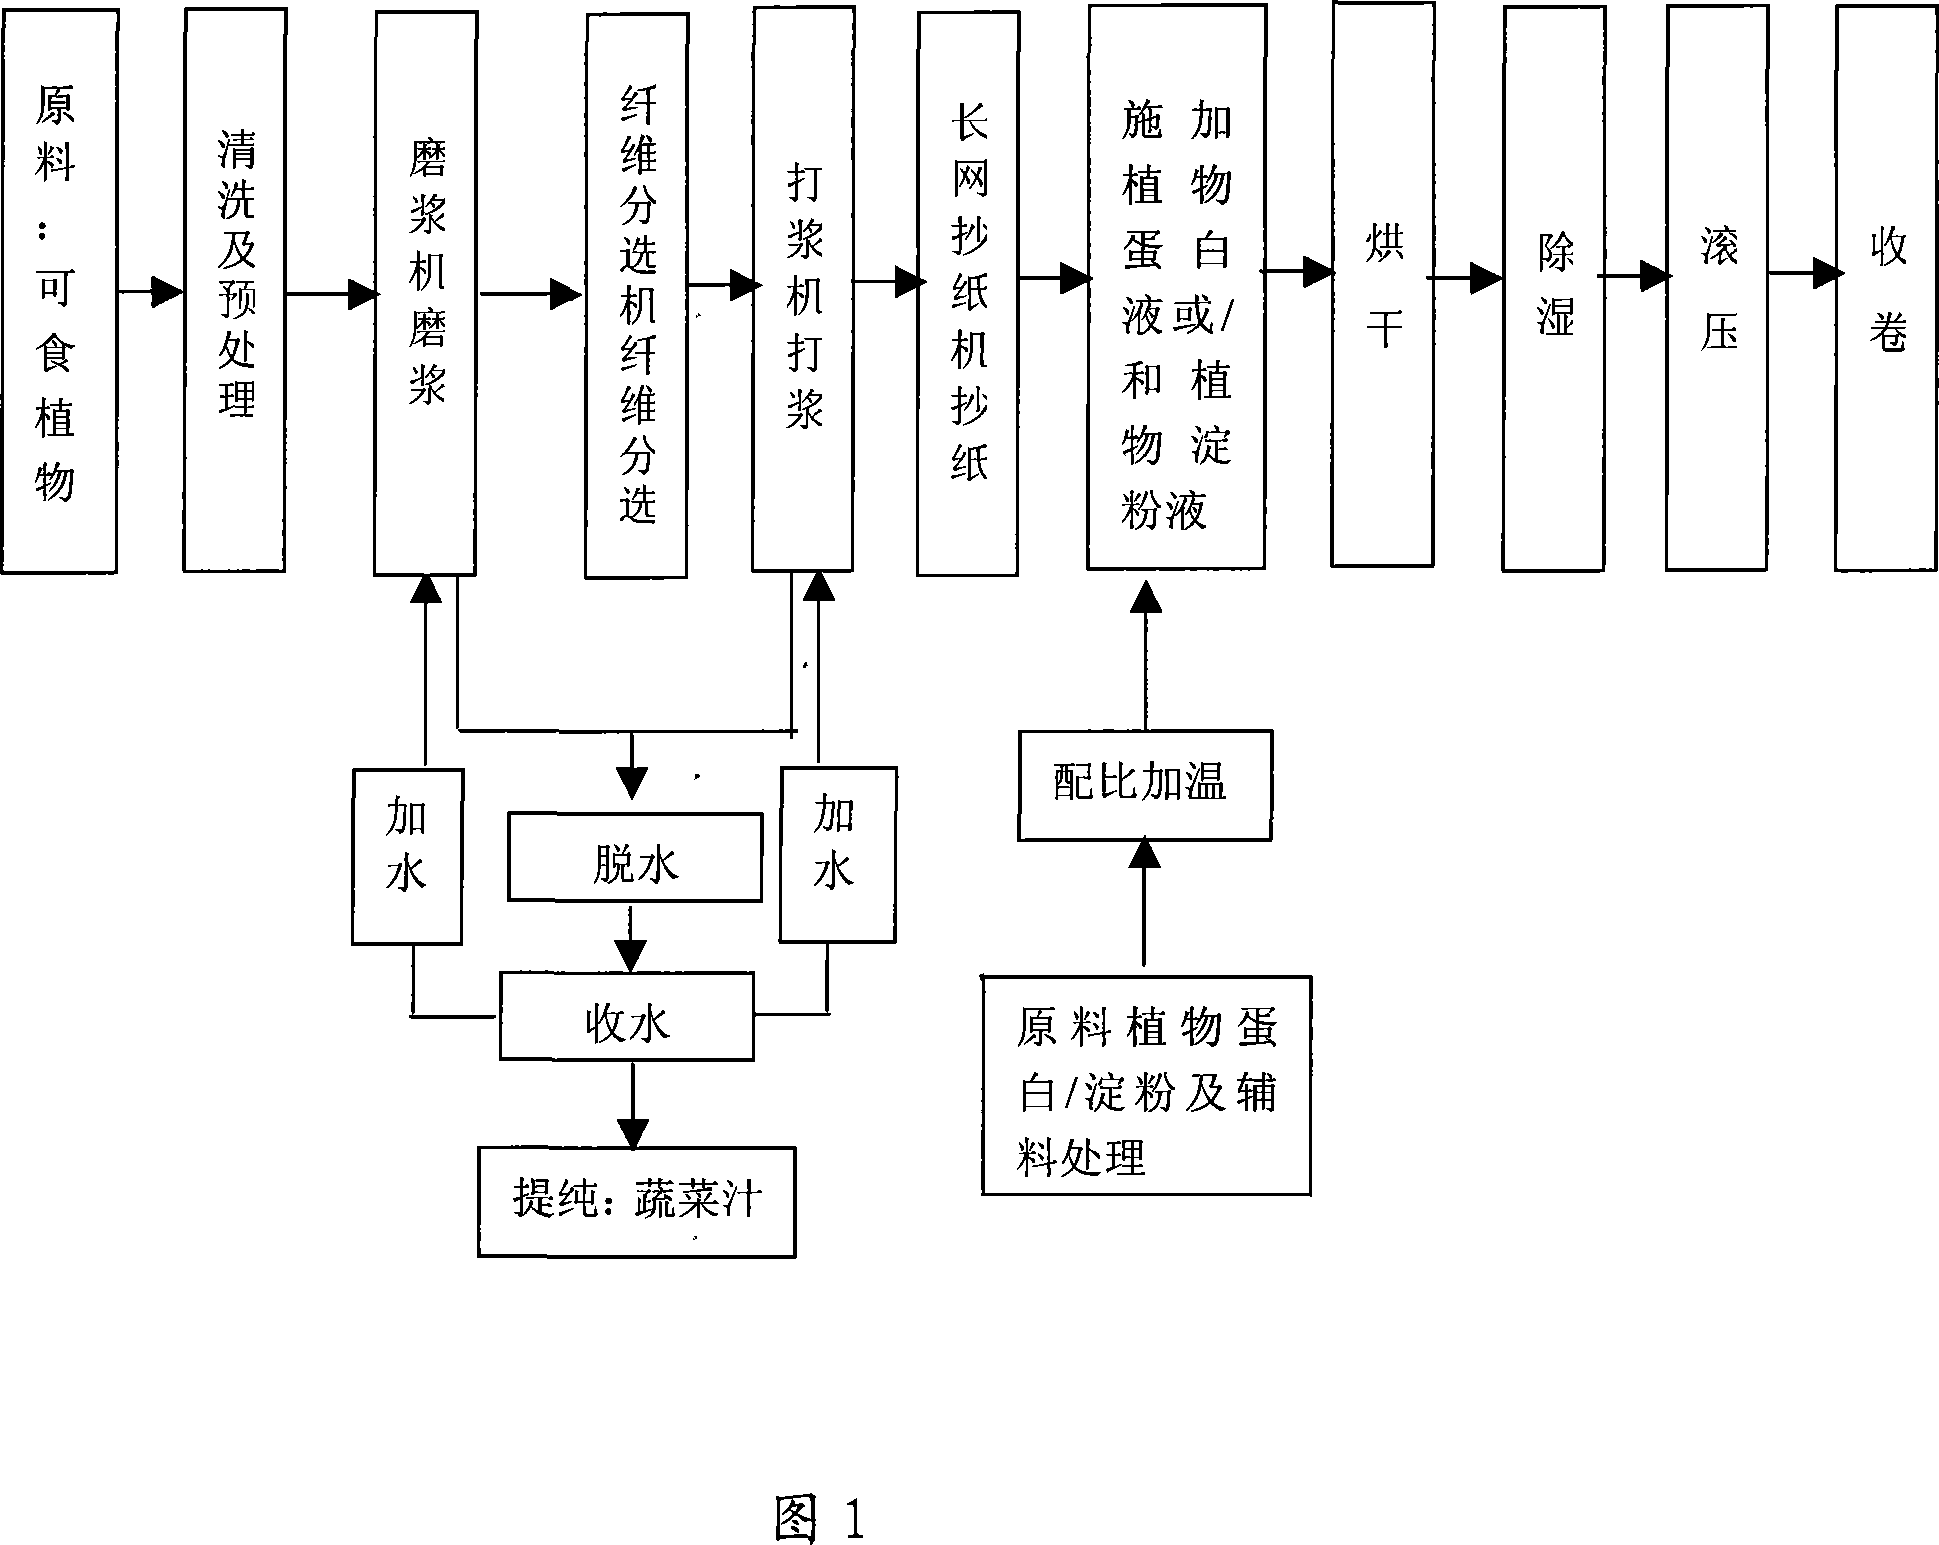 Edible mix paper film and production process mainly with papermaking technique thereof